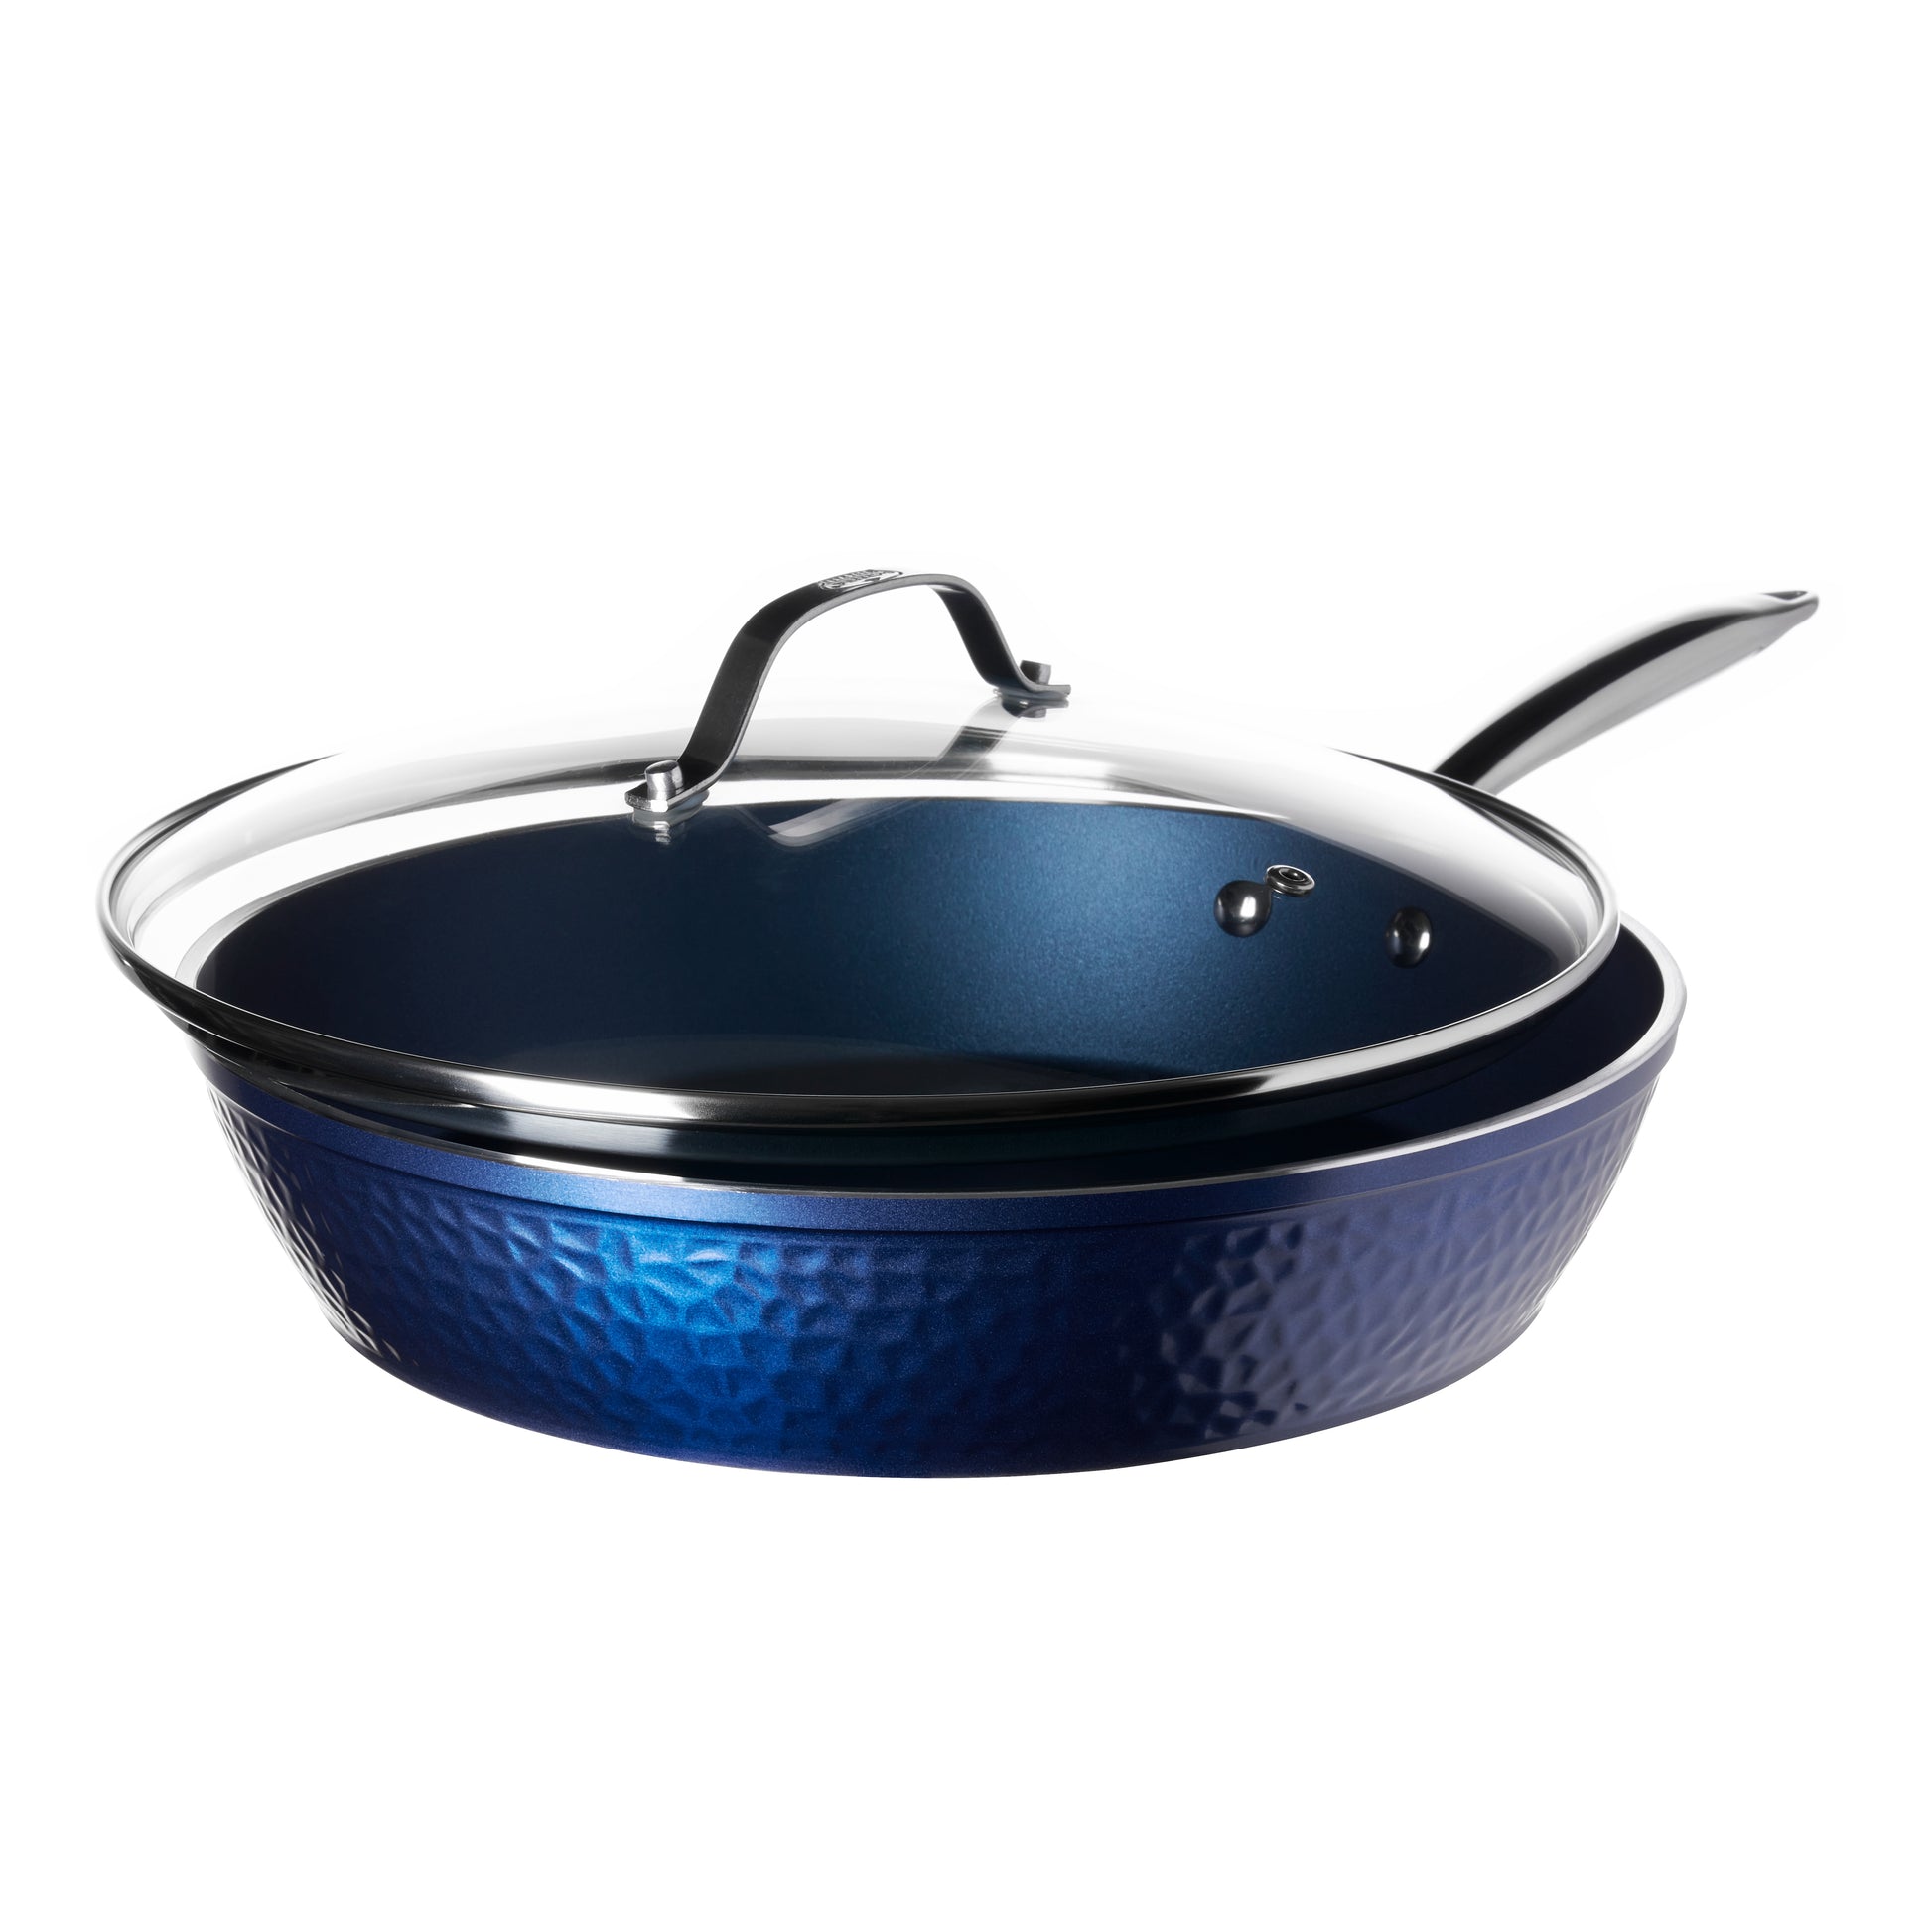 Cast Iron Skillet, Non-Stick,12 inch Frying Pan Skillet Pan for Stove Top, Oven, Blue